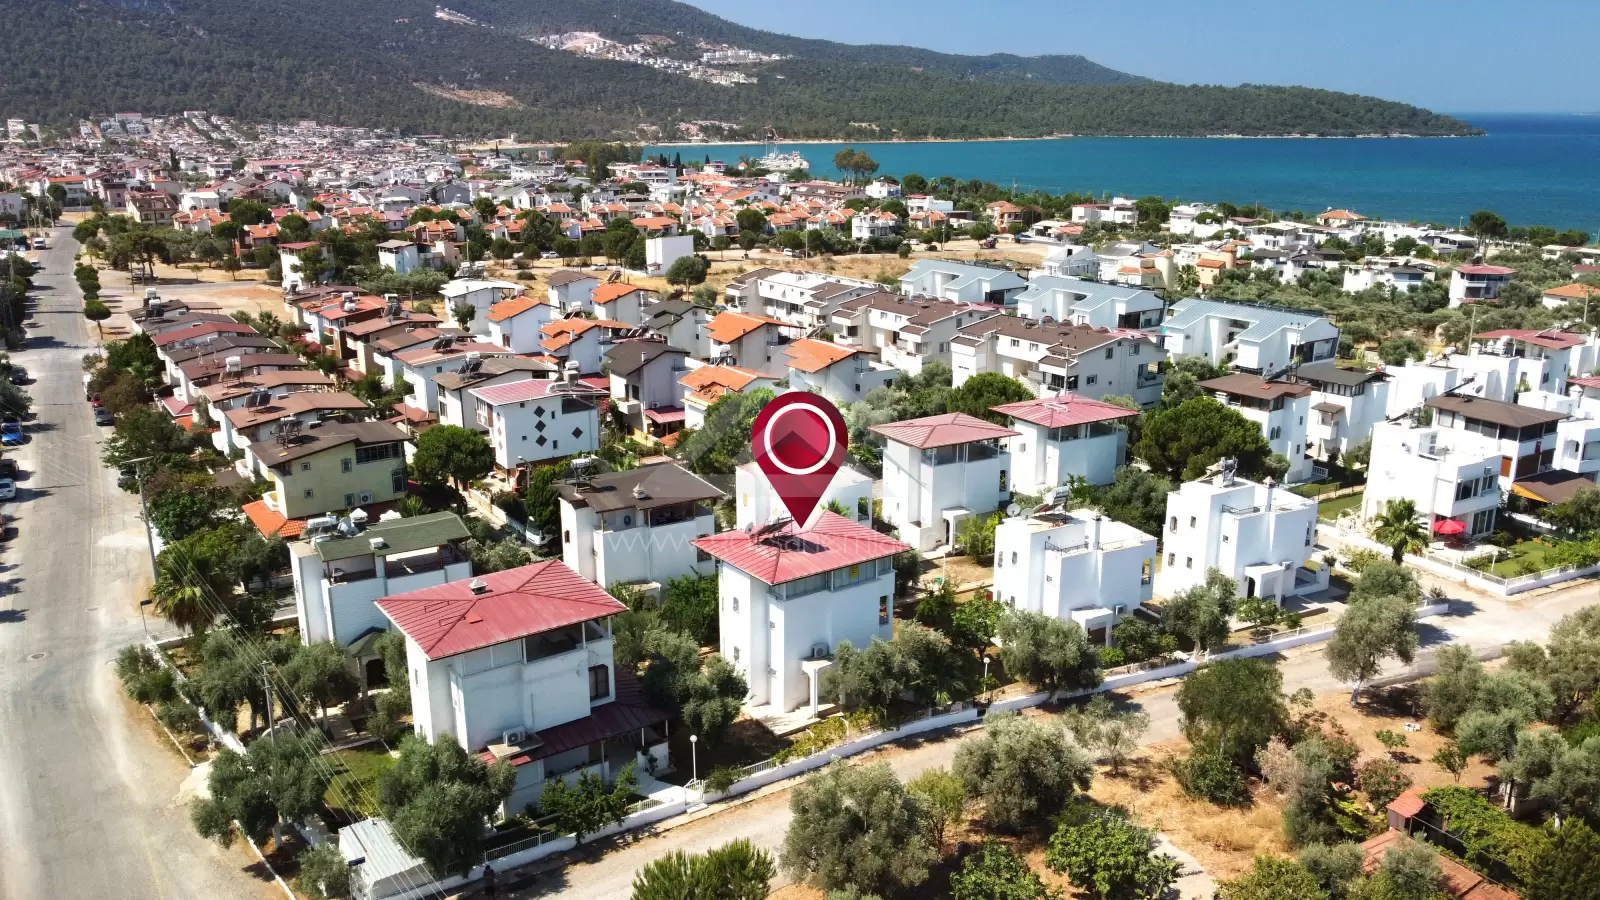 Detached Villa For Sale Center of Akbuk 300 Meters To The Sea